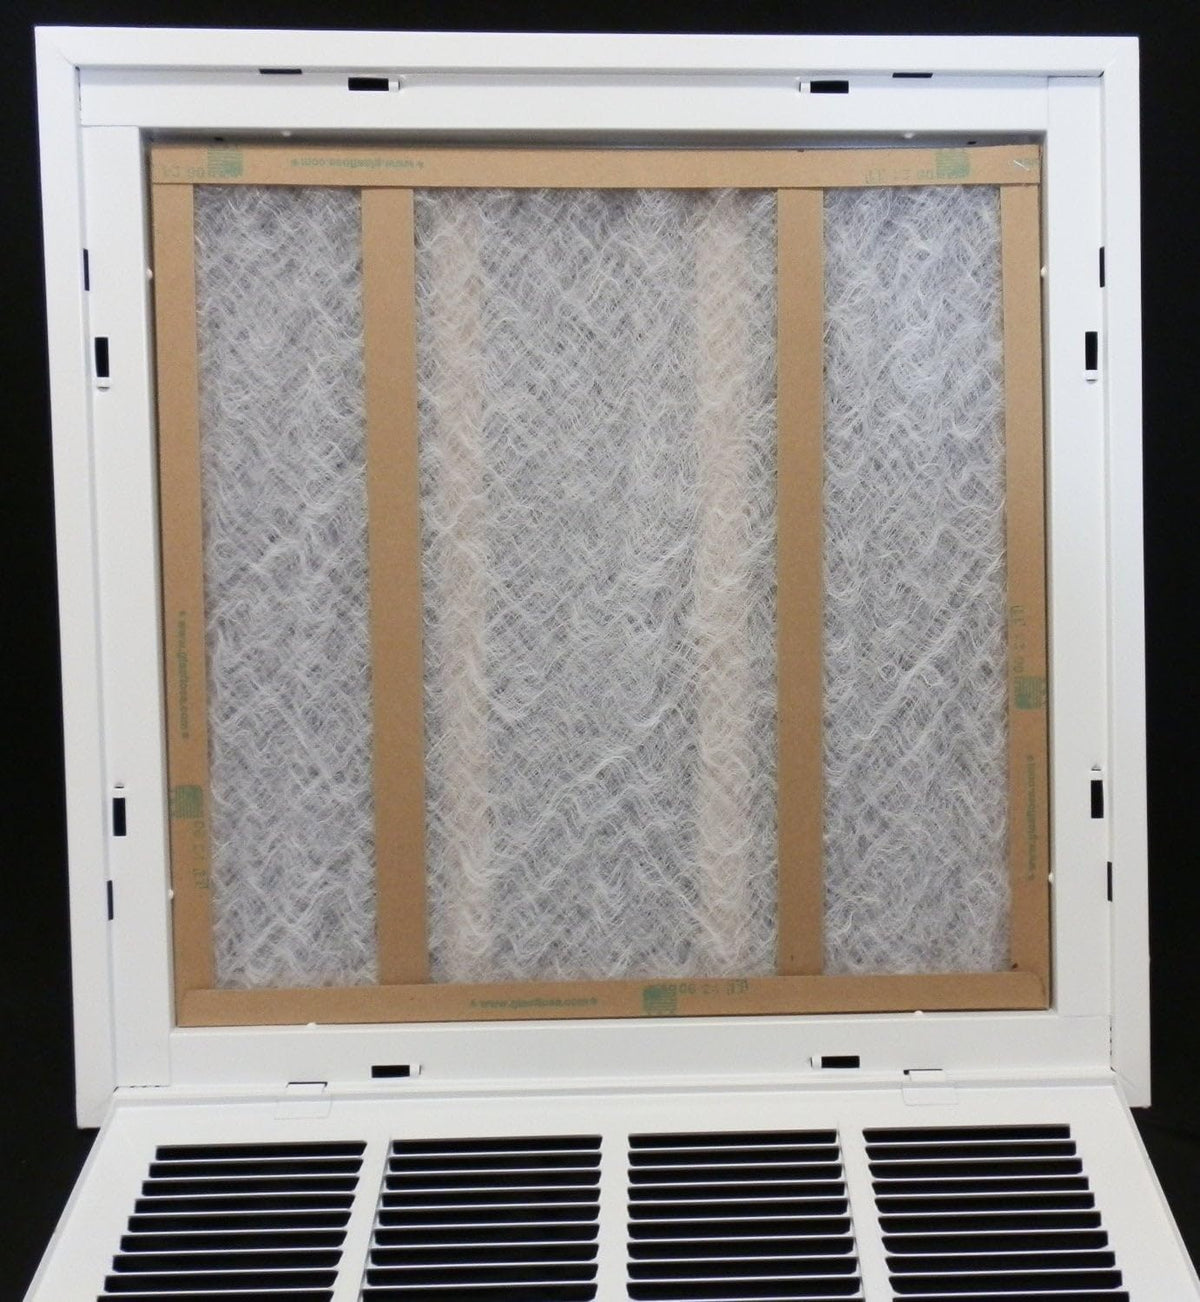 24&quot; X 10&quot; Steel Return Air Filter Grille for 1&quot; Filter - Fixed Hinged - [Outer Dimensions: 26 5/8&quot; X 12 5/8&quot;]